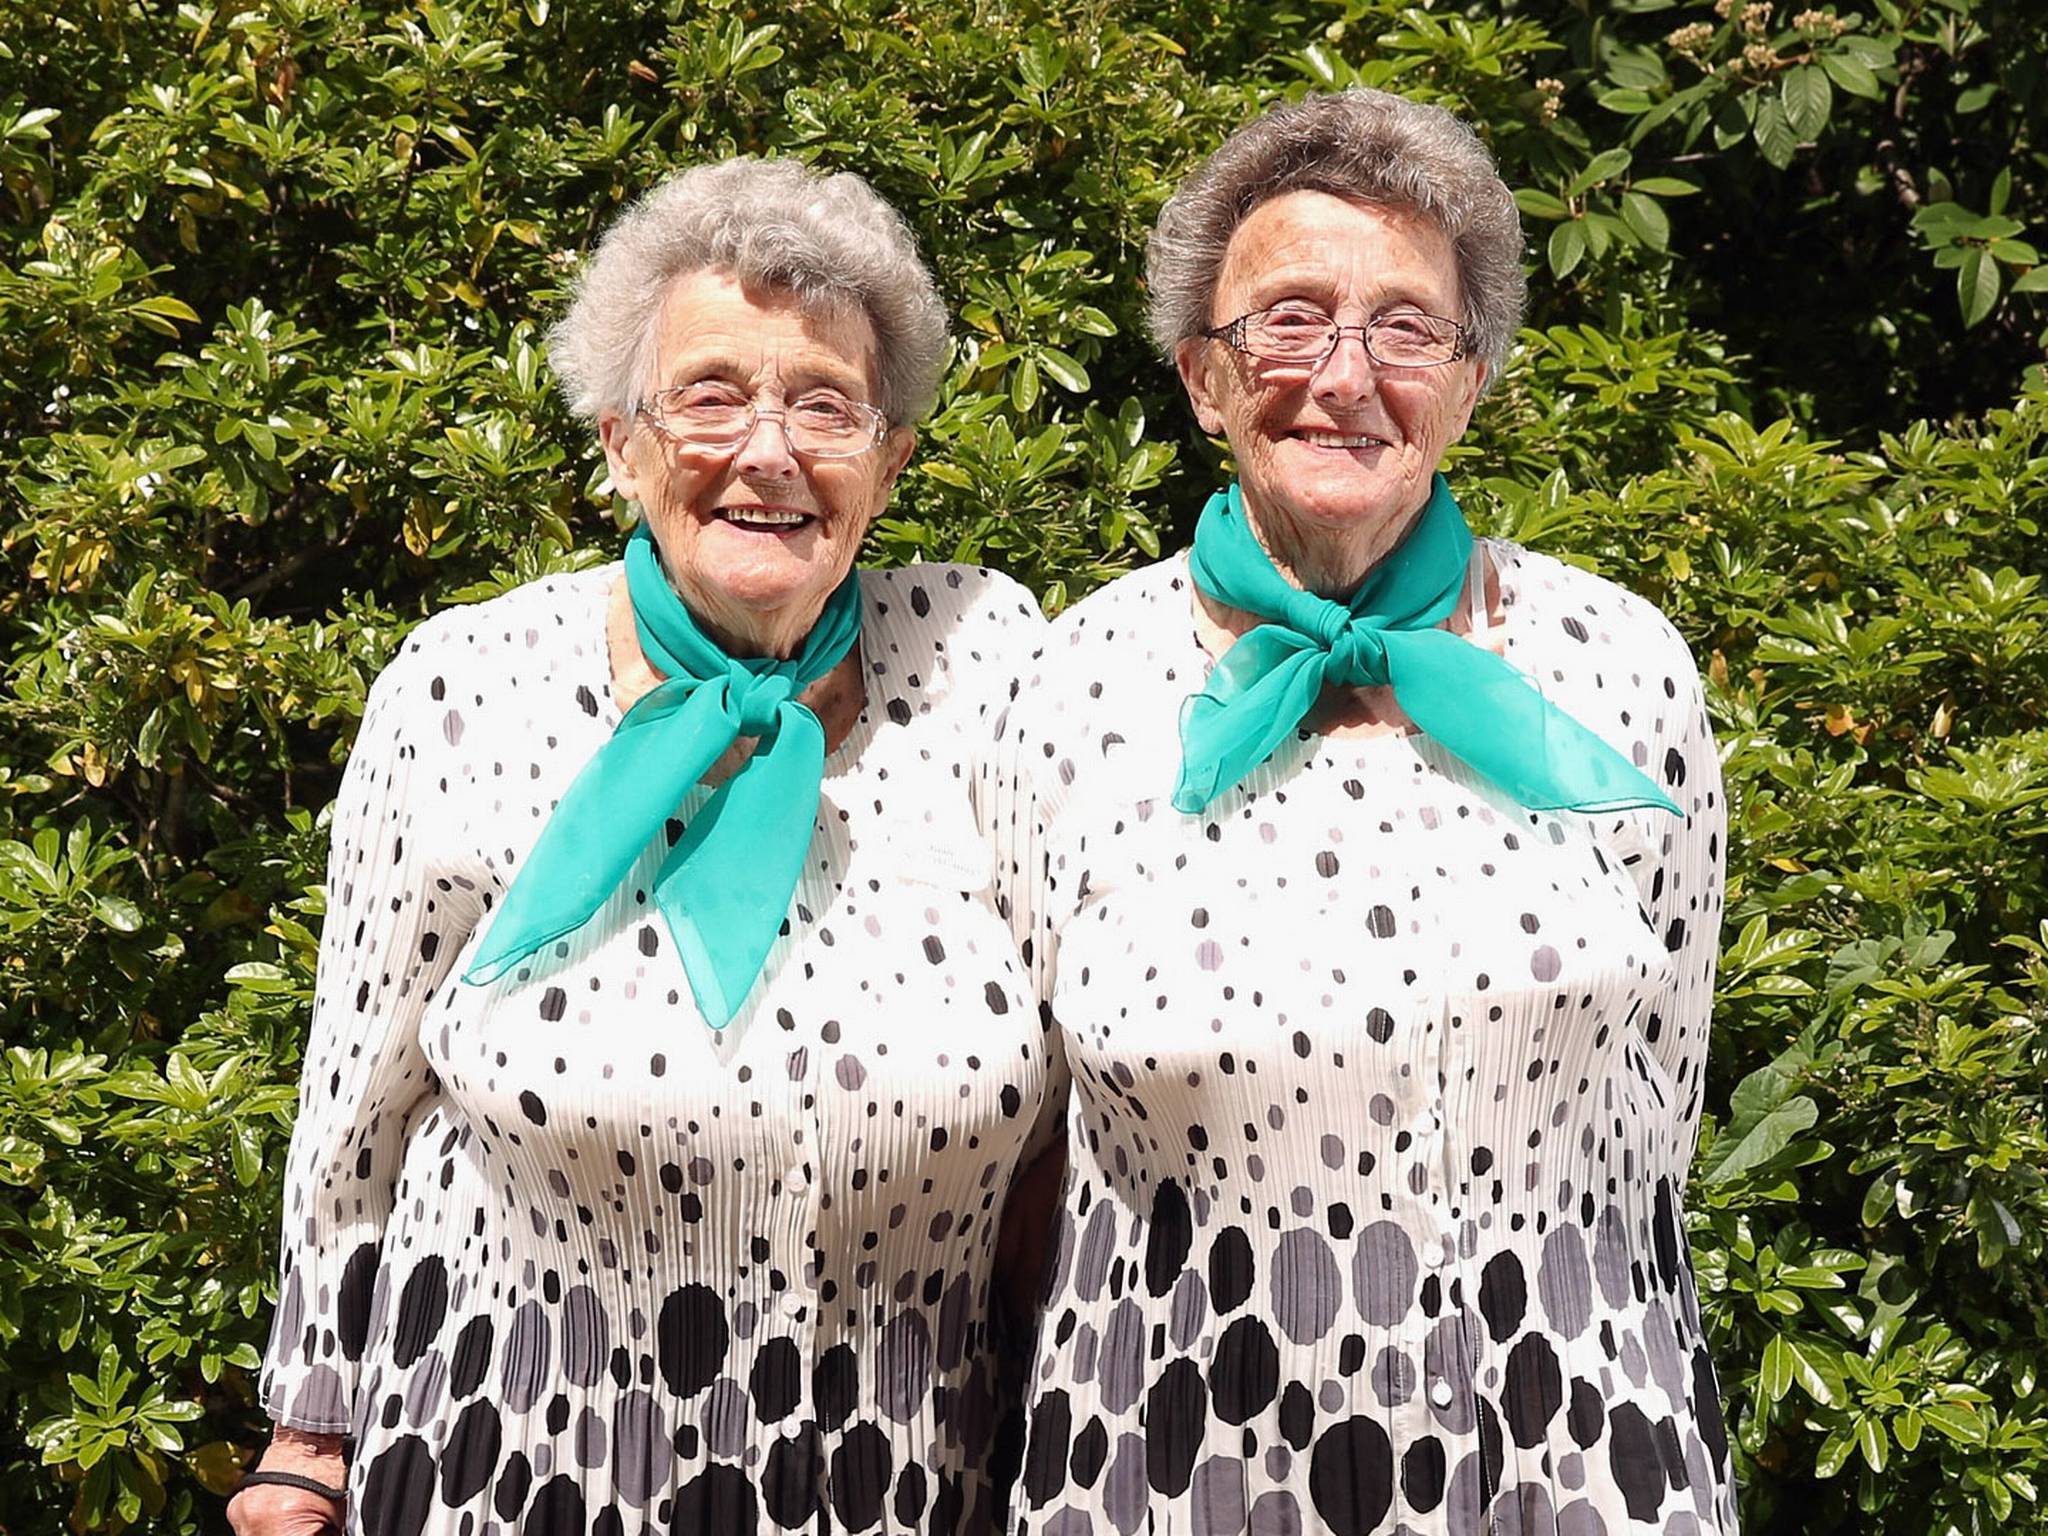 Scientists examined the differences in longevity between identical and non-identical twins